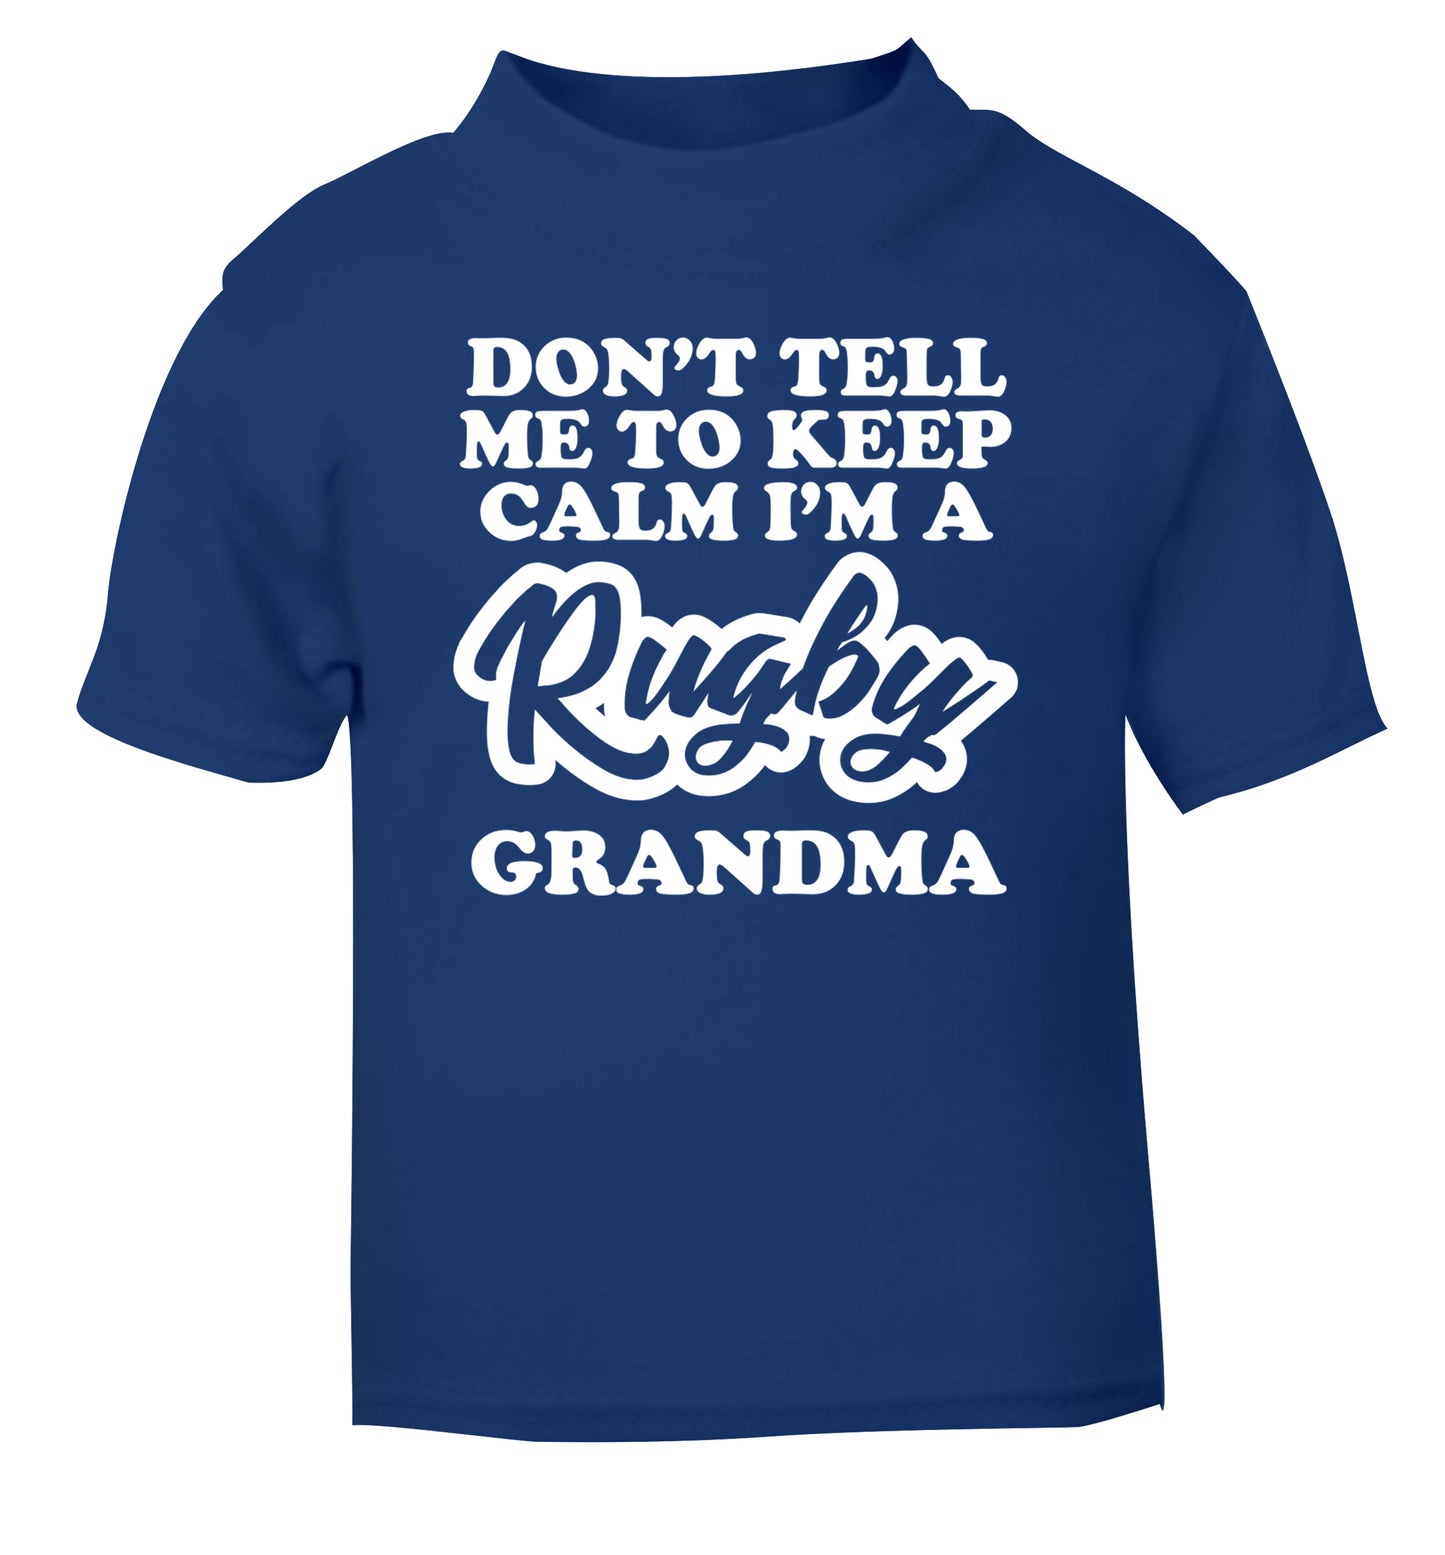 Don't tell me to keep calm I'm a rugby grandma blue Baby Toddler Tshirt 2 Years